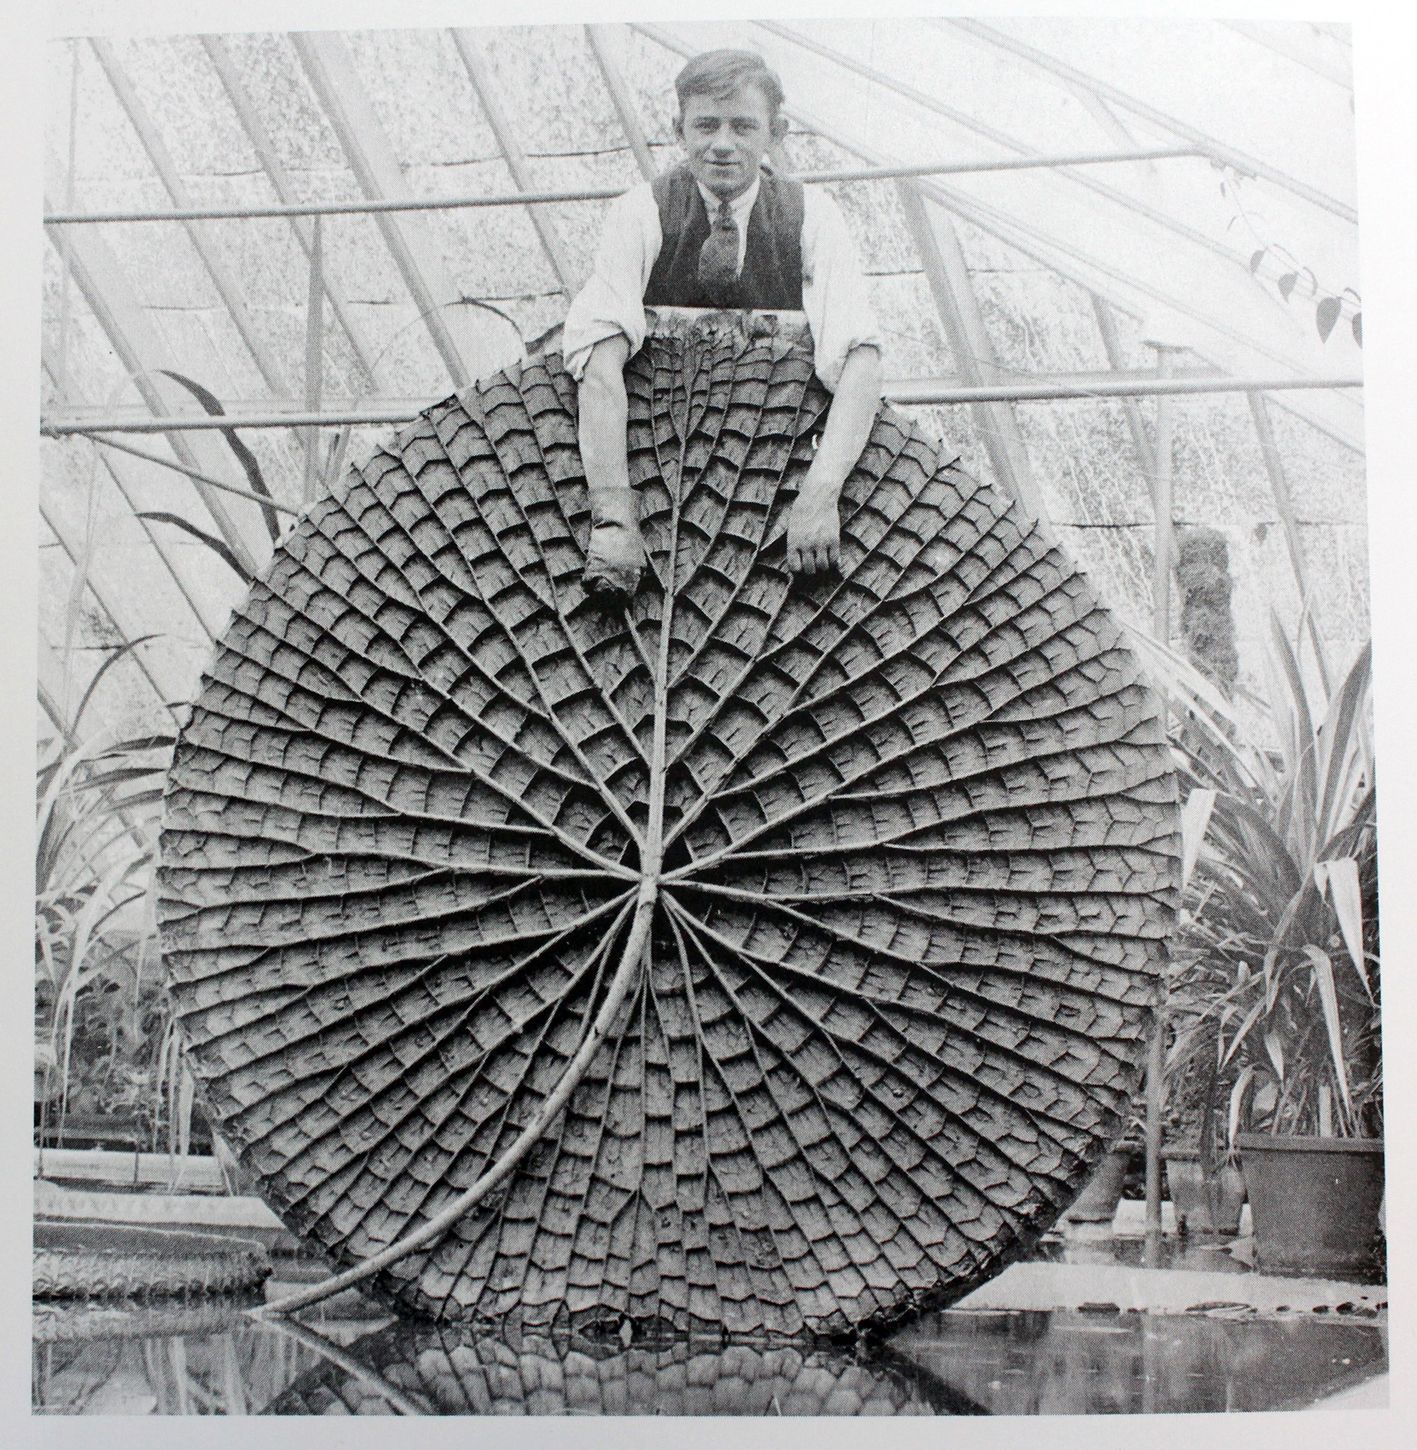 Joseph Paxton photographed with a fine specimen of the Victoria amazonica leaf inside a greenhouse at Chatsworth House